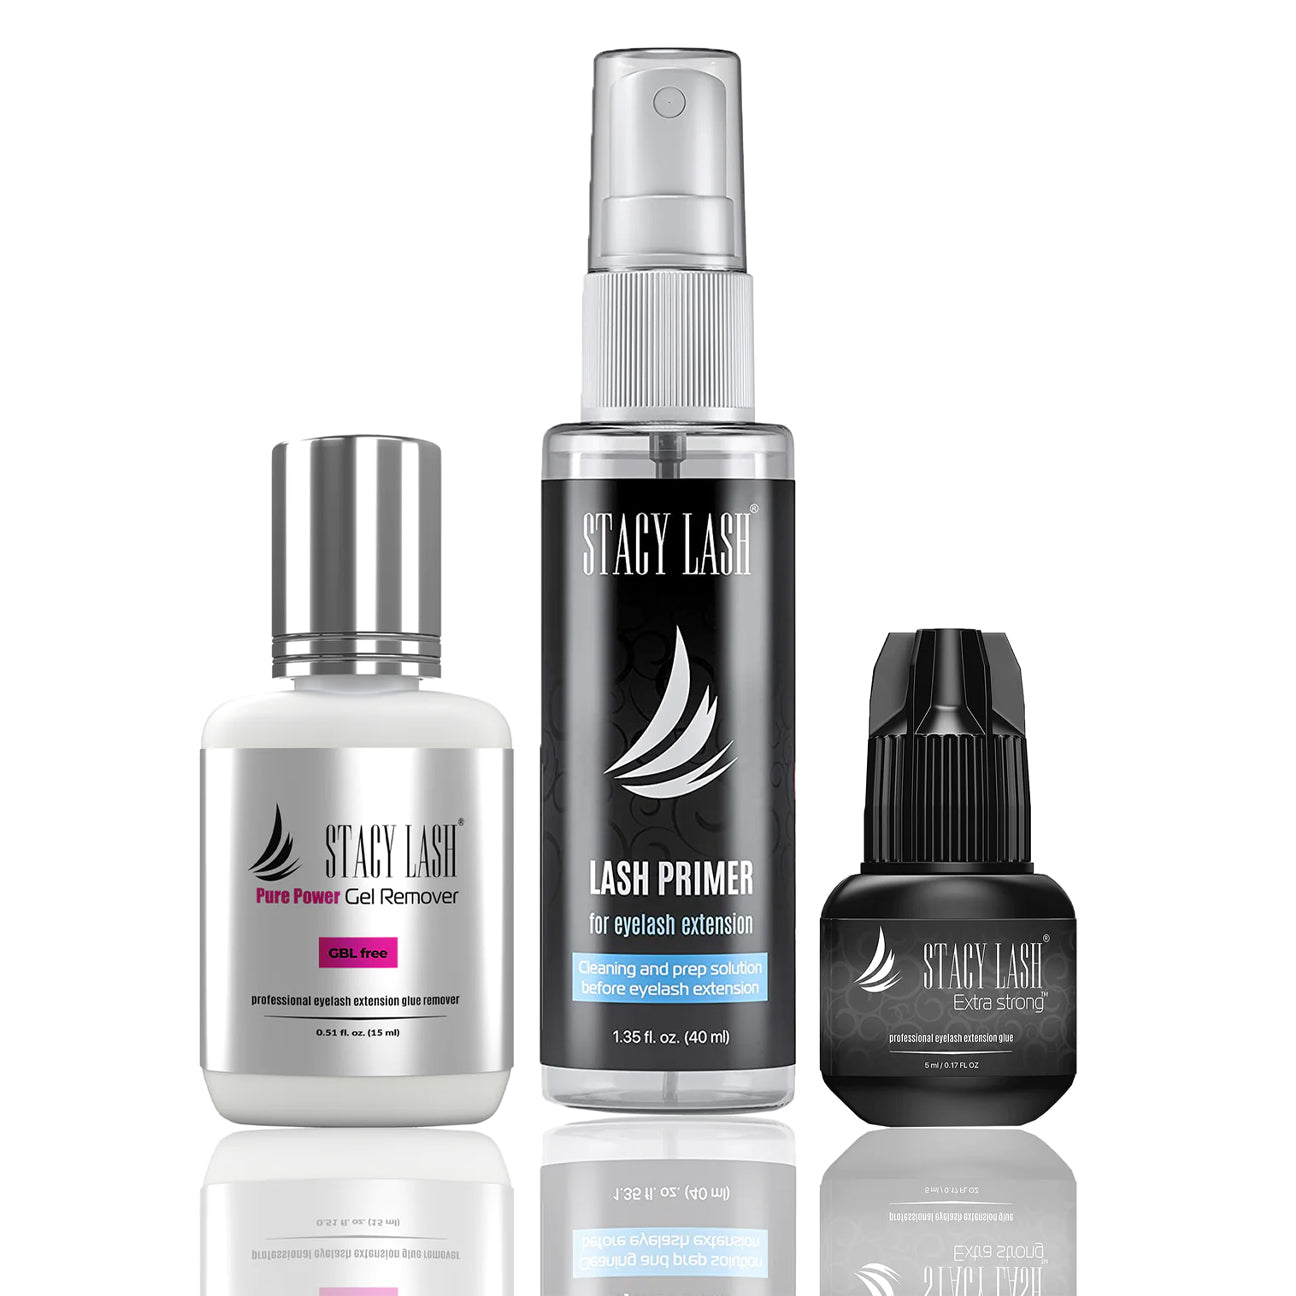 Stacy Lash Bundle: Extra Strong 5ml & Primer 40ml & Pure Gel Remover 15ml